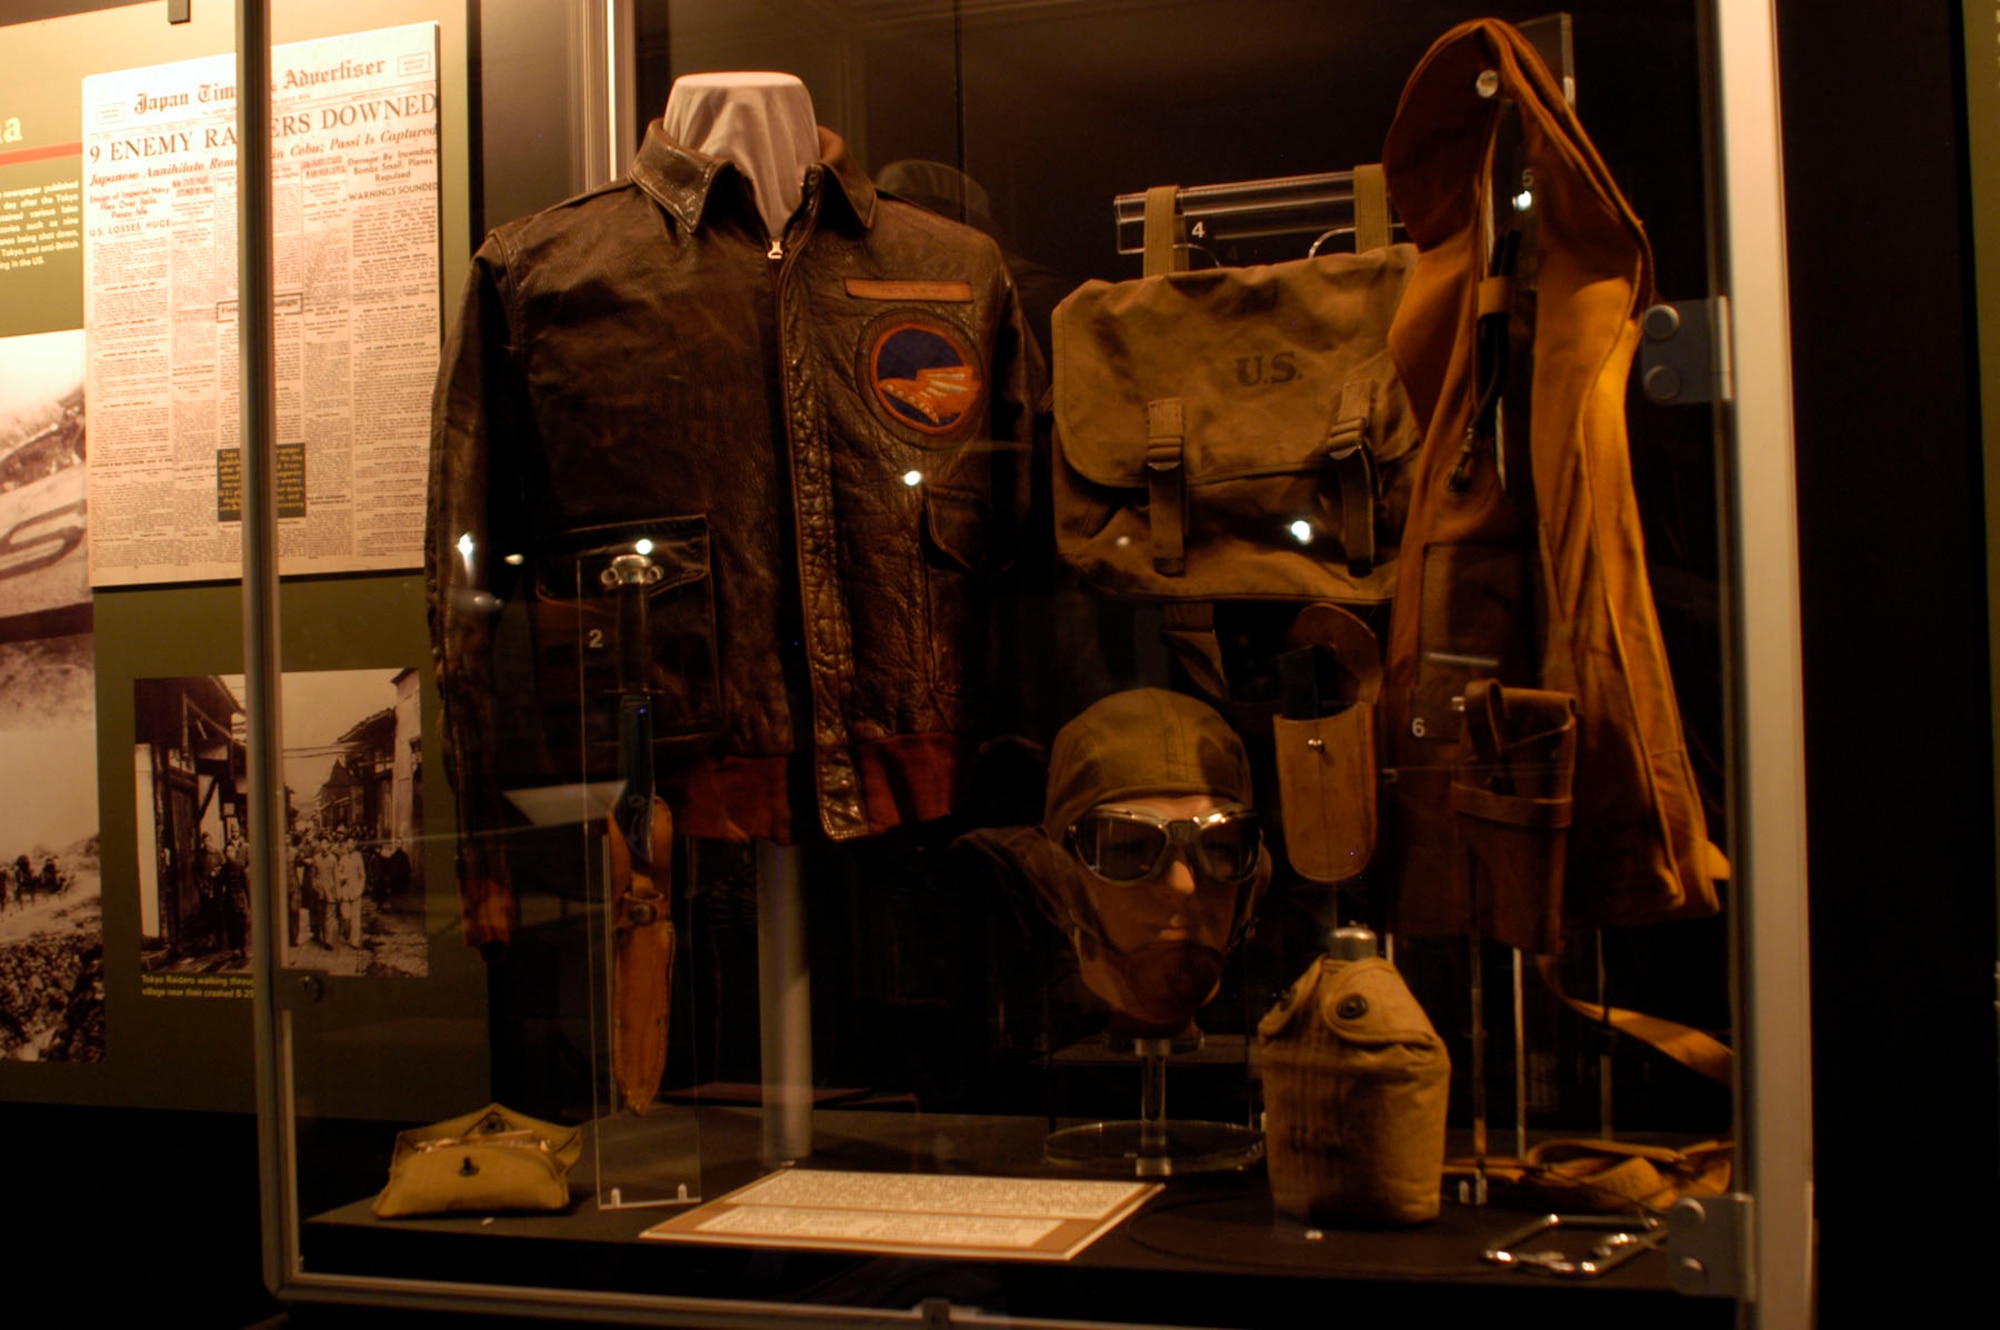 DAYTON, Ohio - Items worn or carried by Lt. Jack A. Sims during the Doolittle Tokyo Raid. These items are on display in the World War II Gallery at the National Museum of the U.S. Air Force. (U.S. Air Force photo)